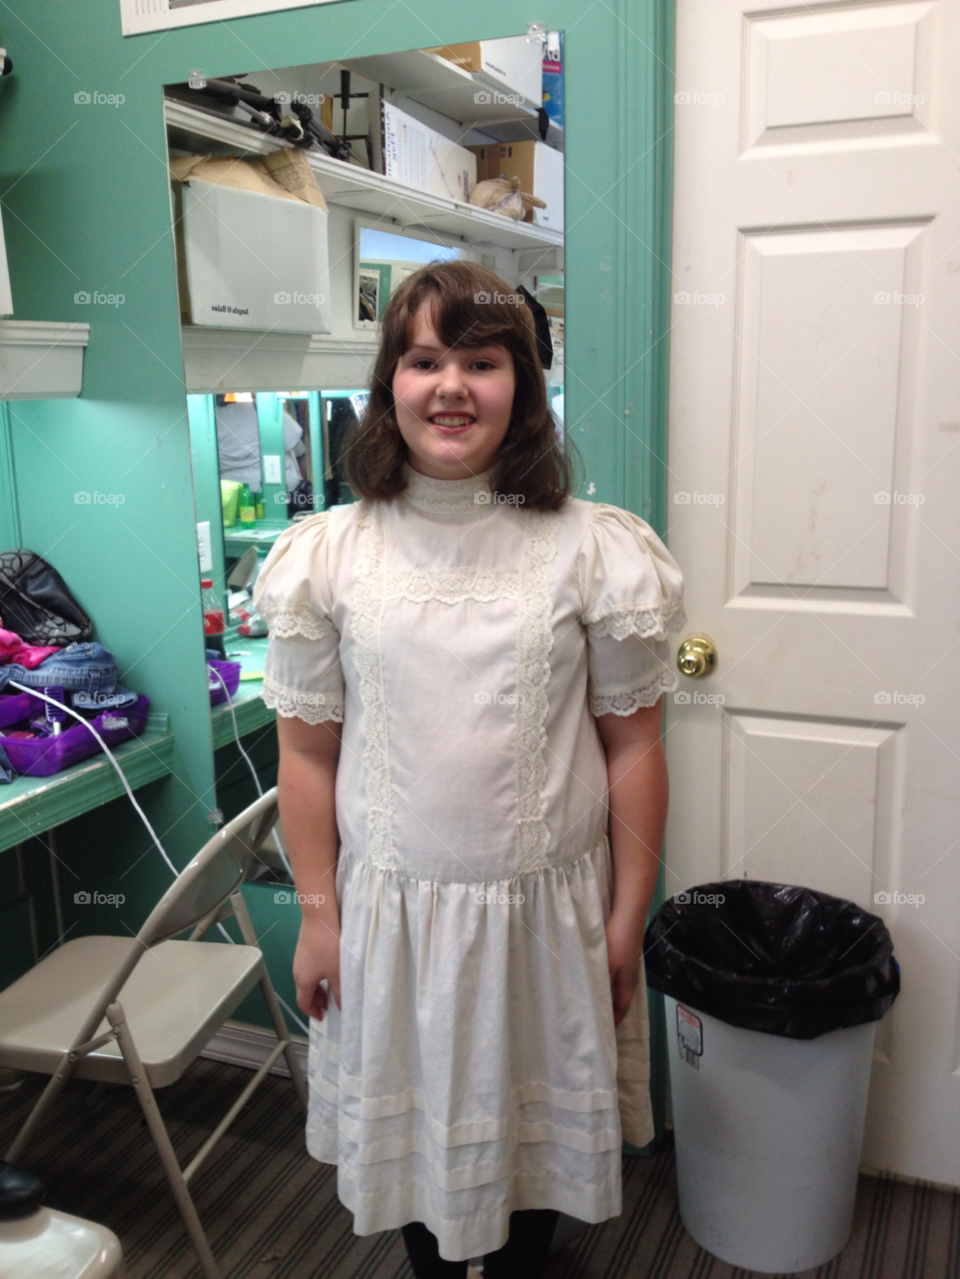 cumberland co playhouse crossville tn child happy mission7 by sarahrutherford